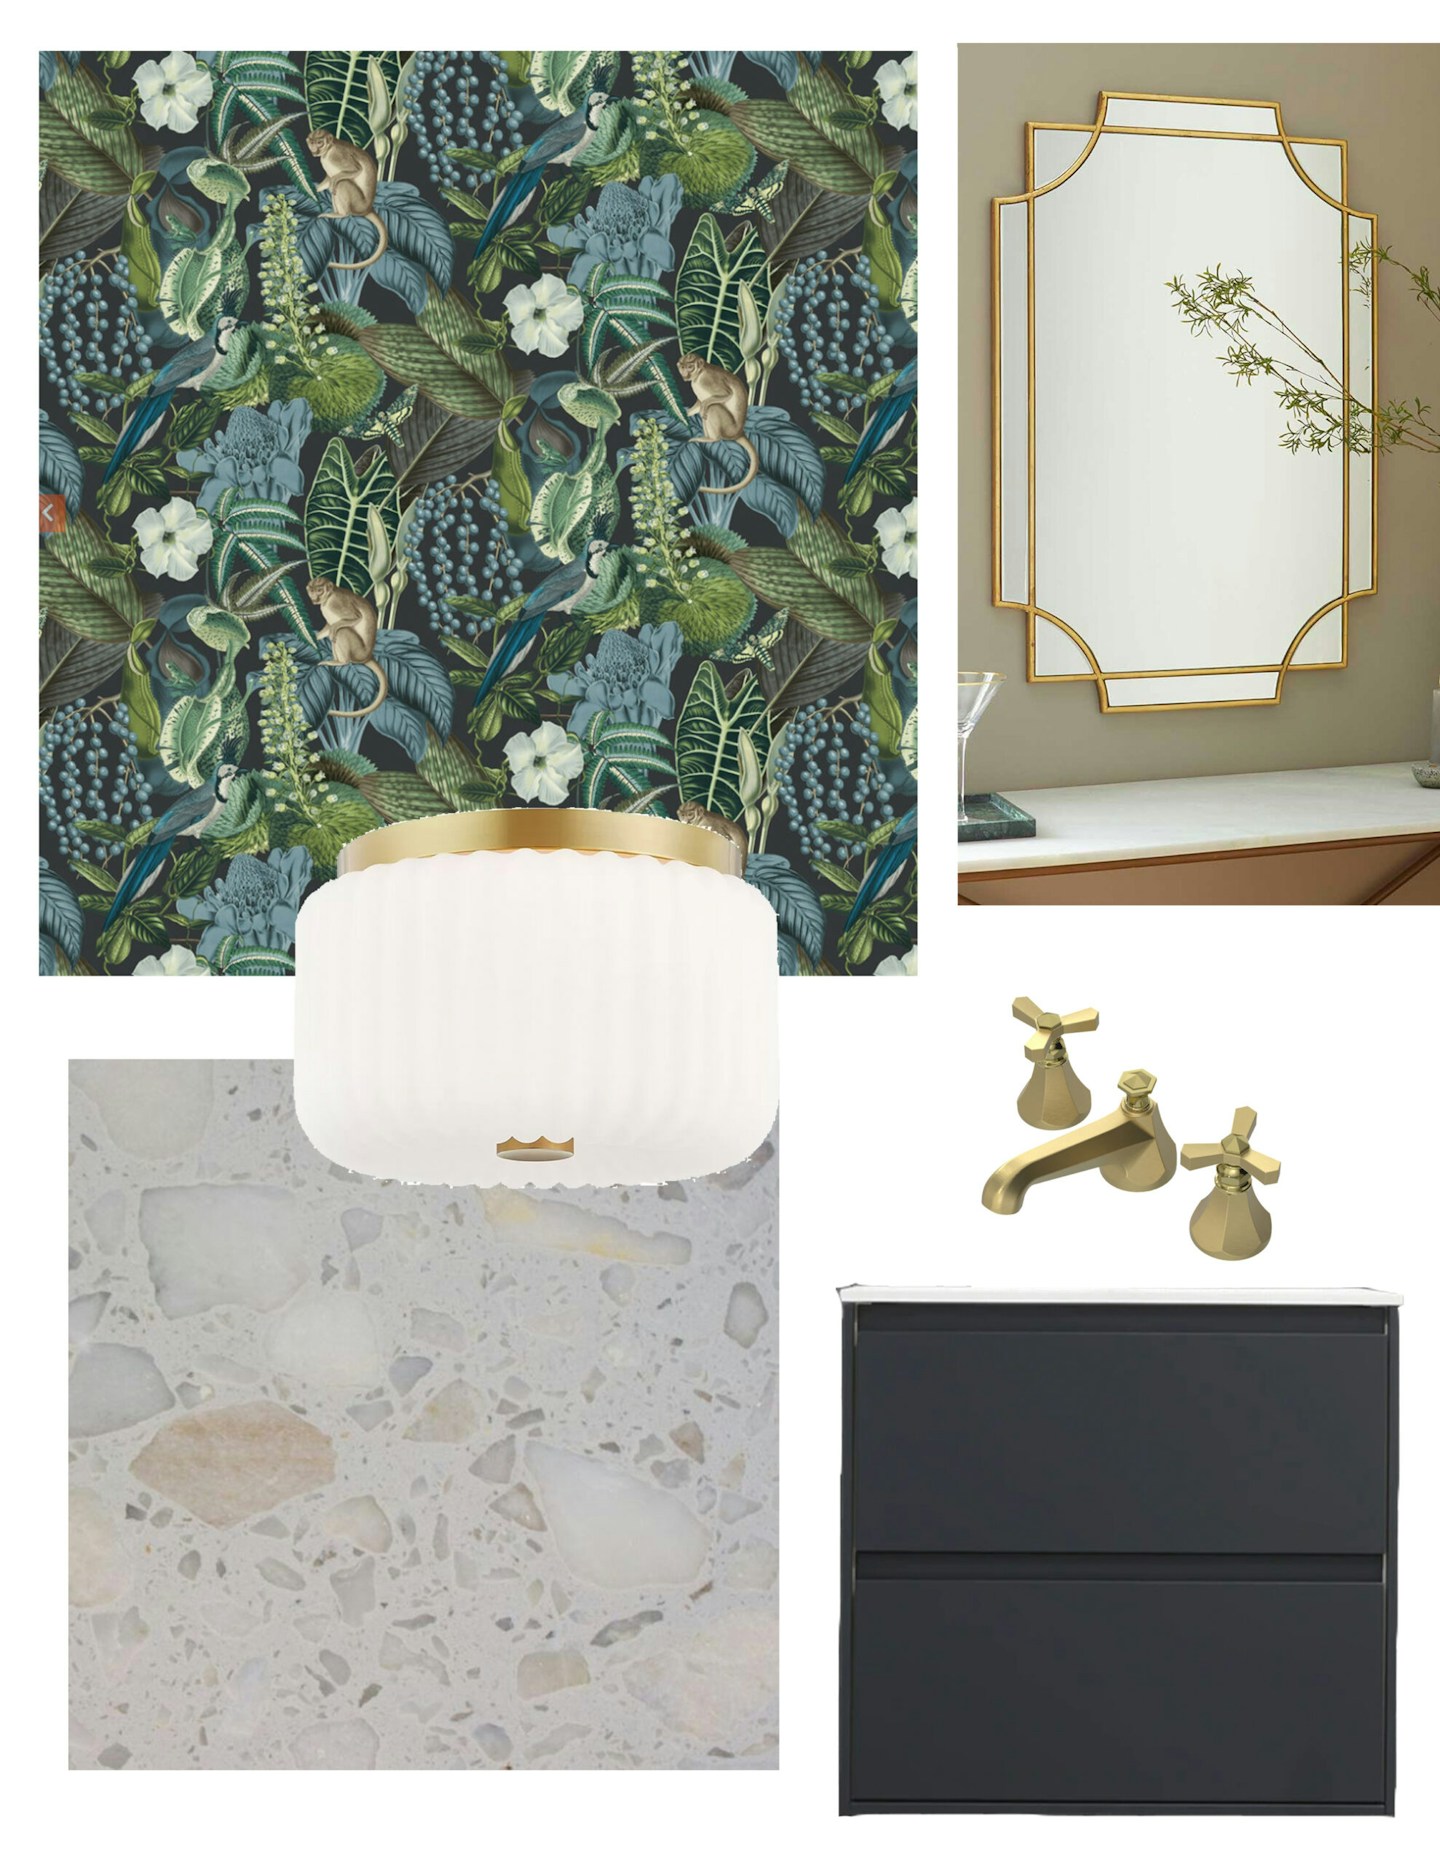 Moody Dark Powder Room Inspiration: this Amazon wallpaper from Wallpaper Direct is a stunning, whimsical design, that we accented with terrazzo tile and brass fixtures.